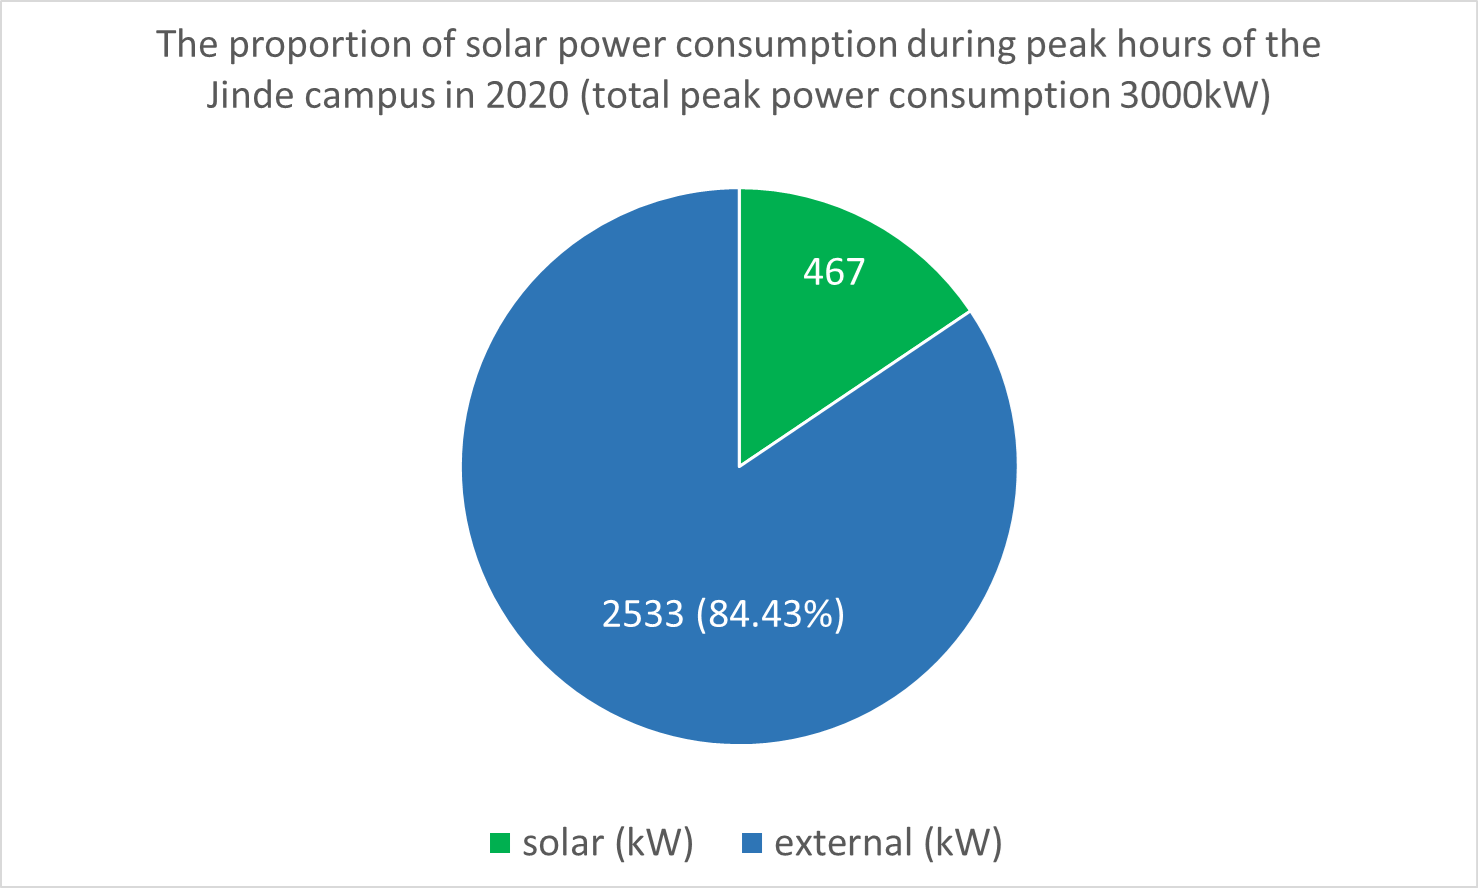 Figure 2. The proportion of solar power consumption during peak hours of the Jinde campus in 2020